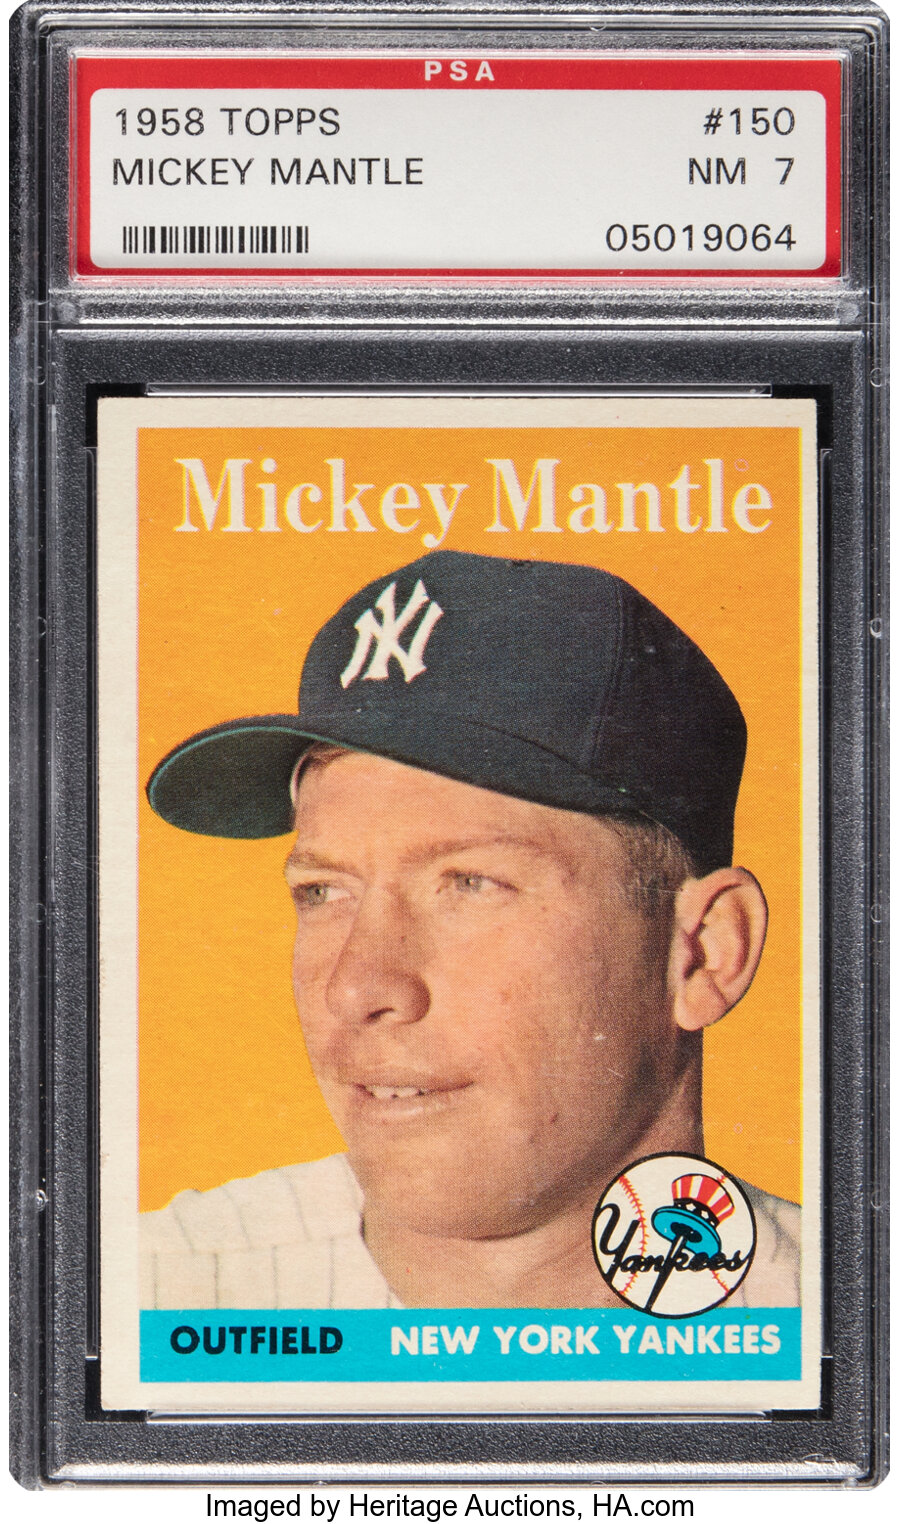 1958 Topps Mickey Mantle #150 PSA NM 7